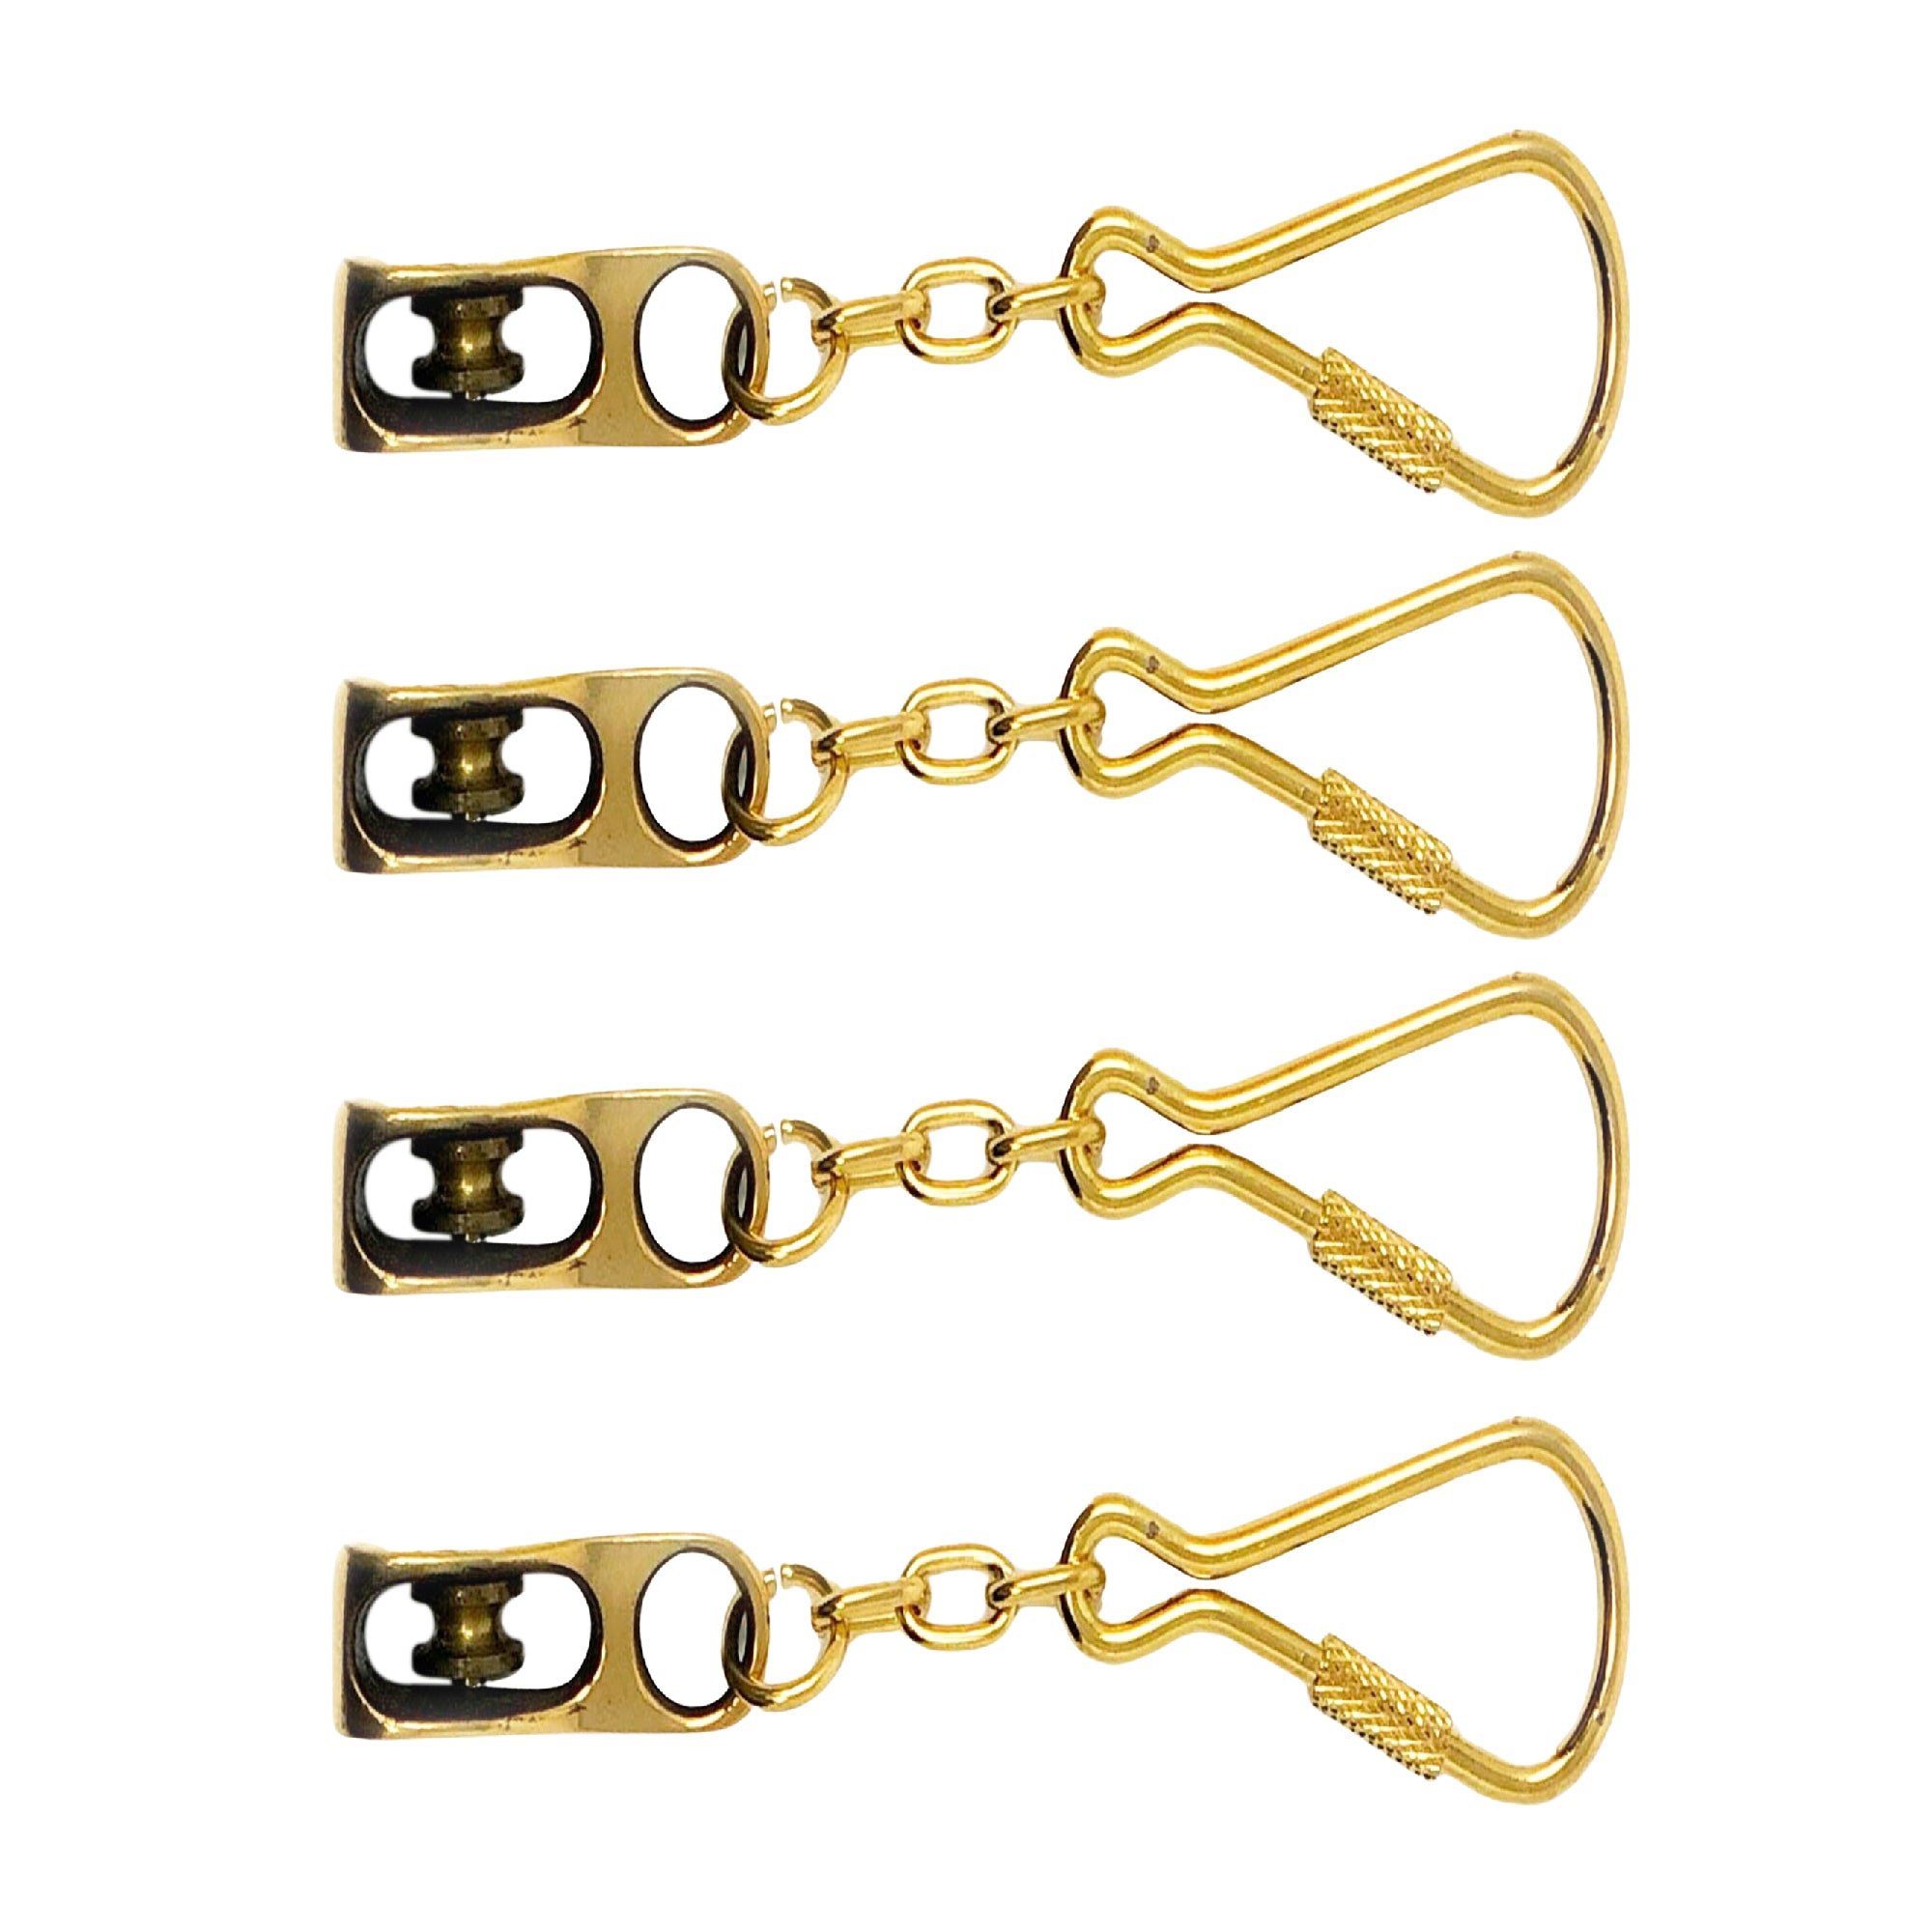 Block Keychain, Solid Brass 4-Pack FO2216-M4